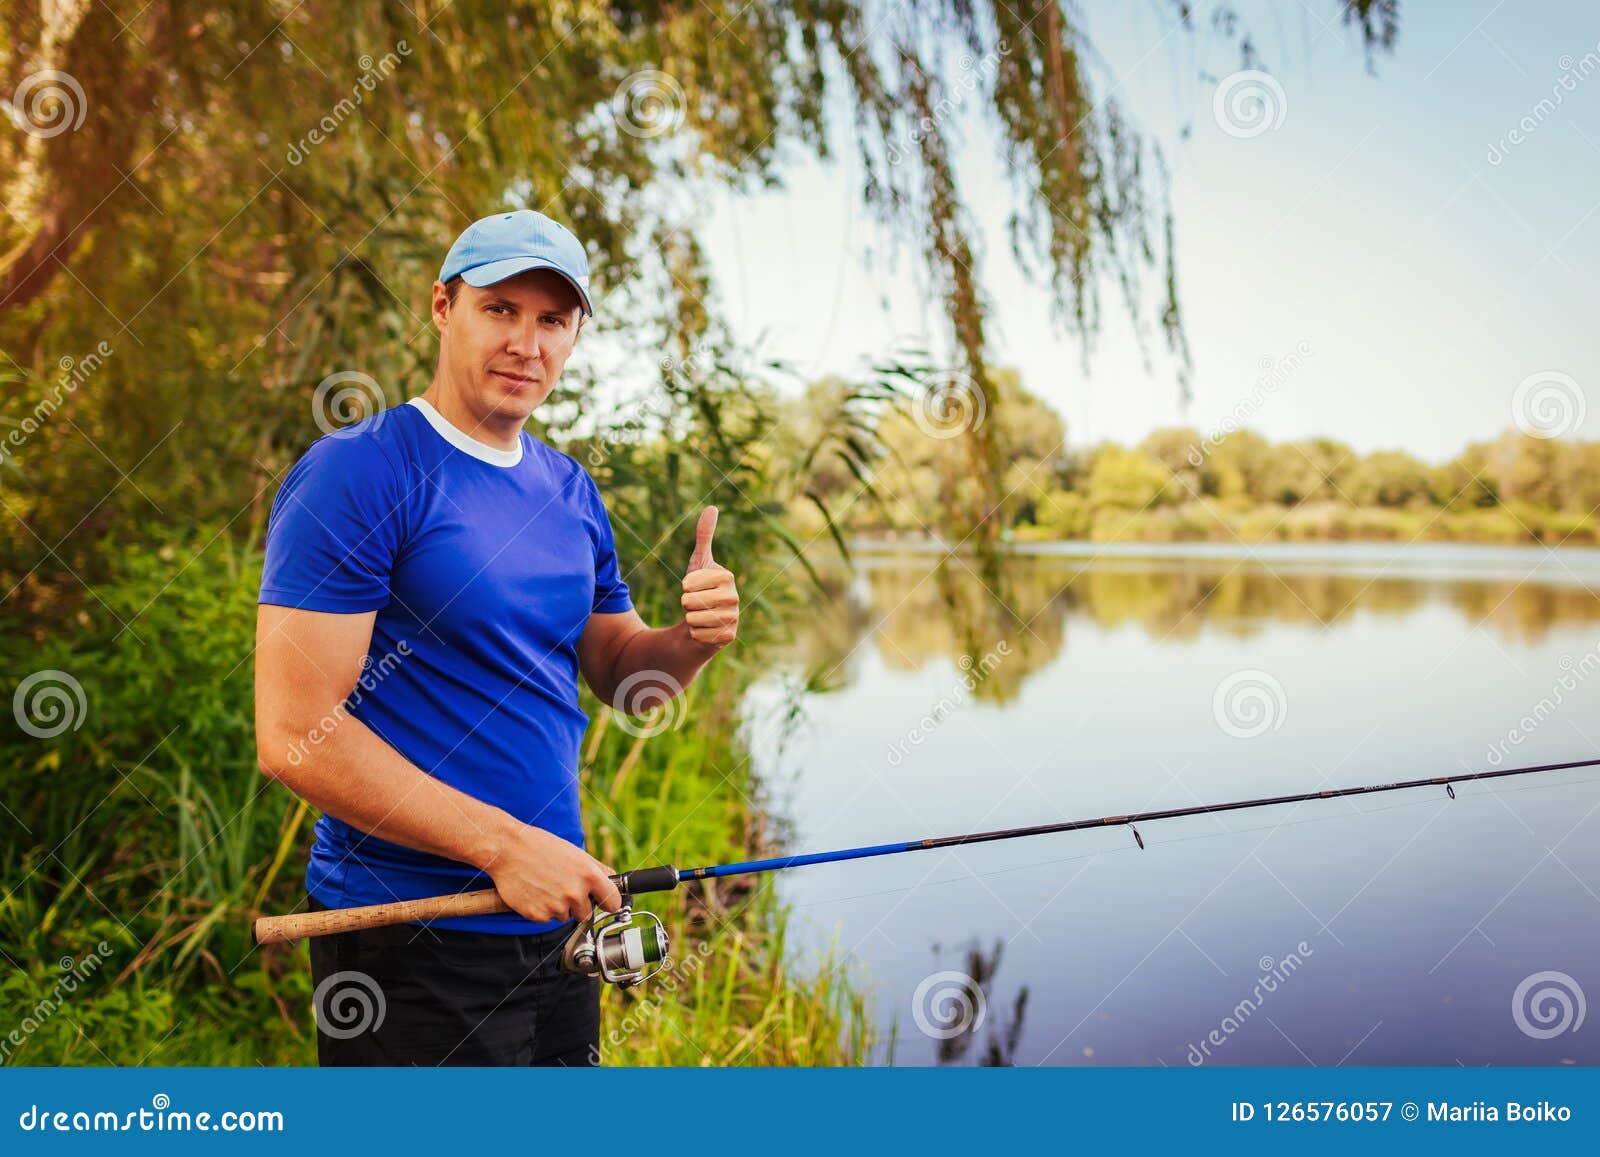 Young Man Fishing on River. Happy Fiserman Showing Thumb Up. Hobby Concept  Stock Image - Image of catch, lifestyle: 126576057